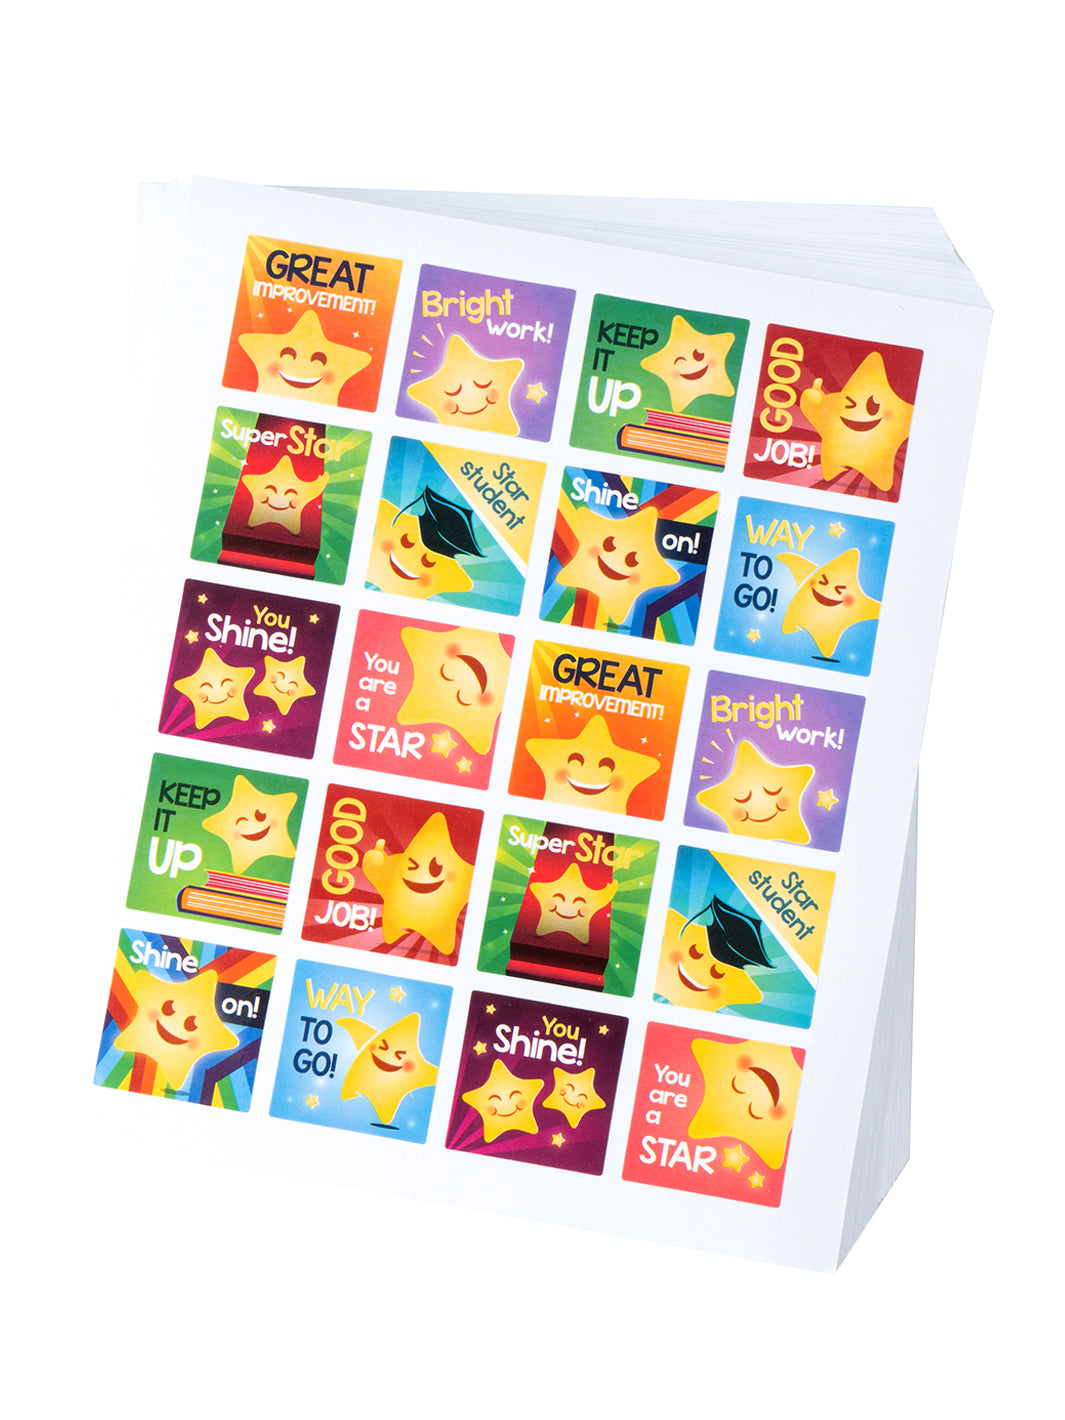 6492 Tiny Stickers for Kids Classroom - 60 Sheets of Reward Stickers for Kids, Small Stickers for Kids Reward Chart, Little Stickers for Teachers